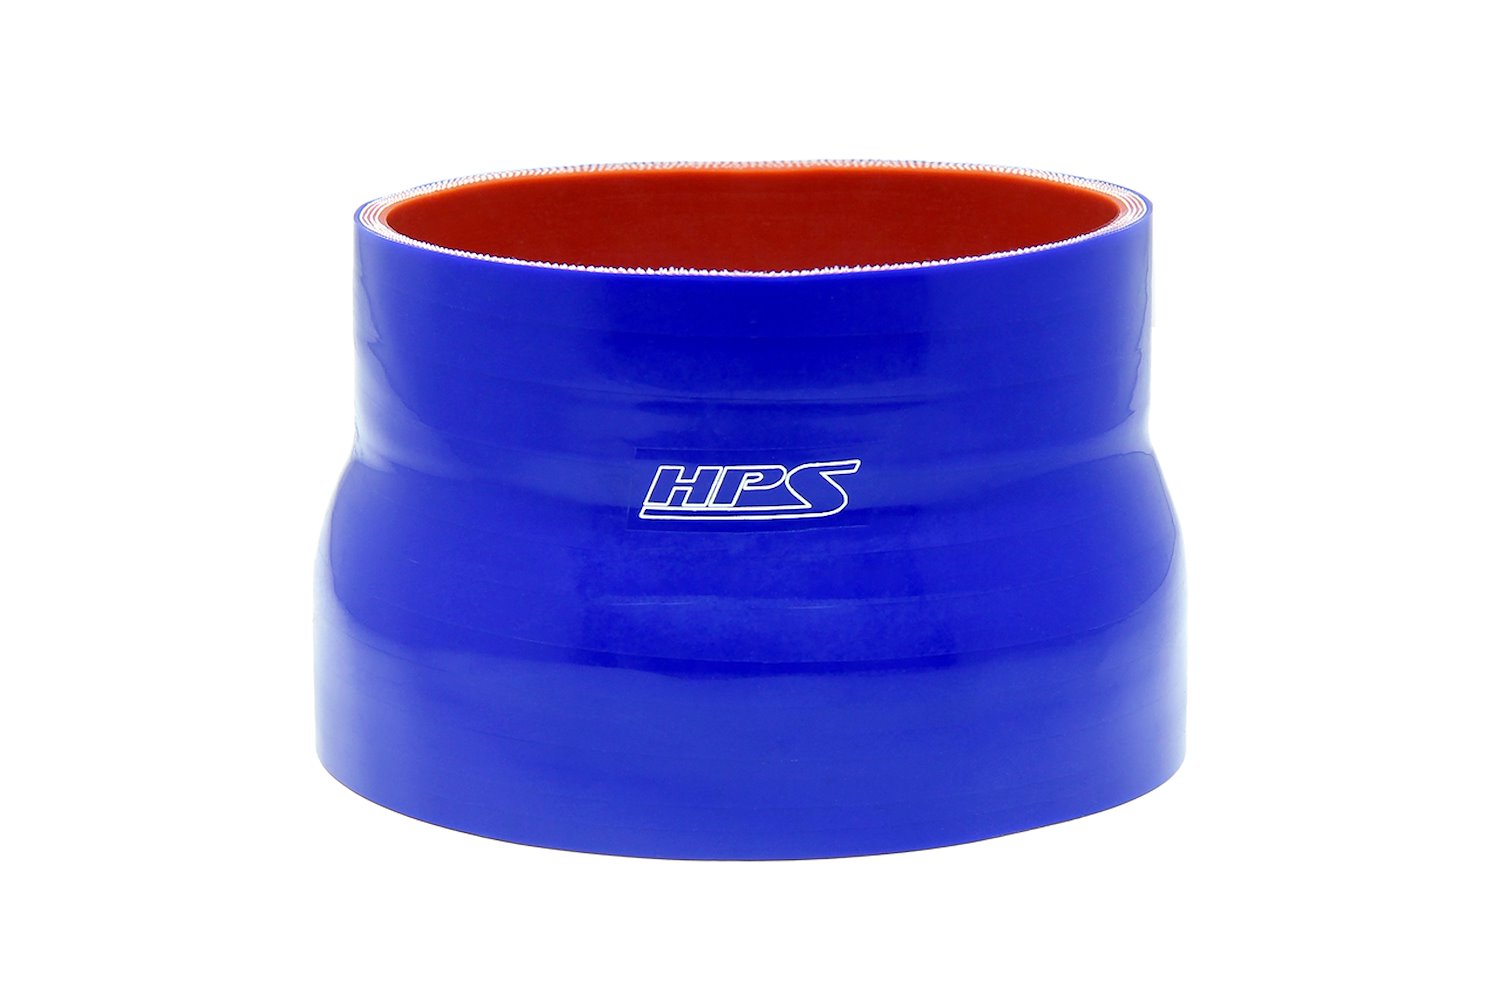 HTSR-450-500-BLUE Silicone Reducer Hose, High-Temp 4-Ply Reinforced, 4-1/2 in. - 5 in. ID, 3 in. Long, Blue